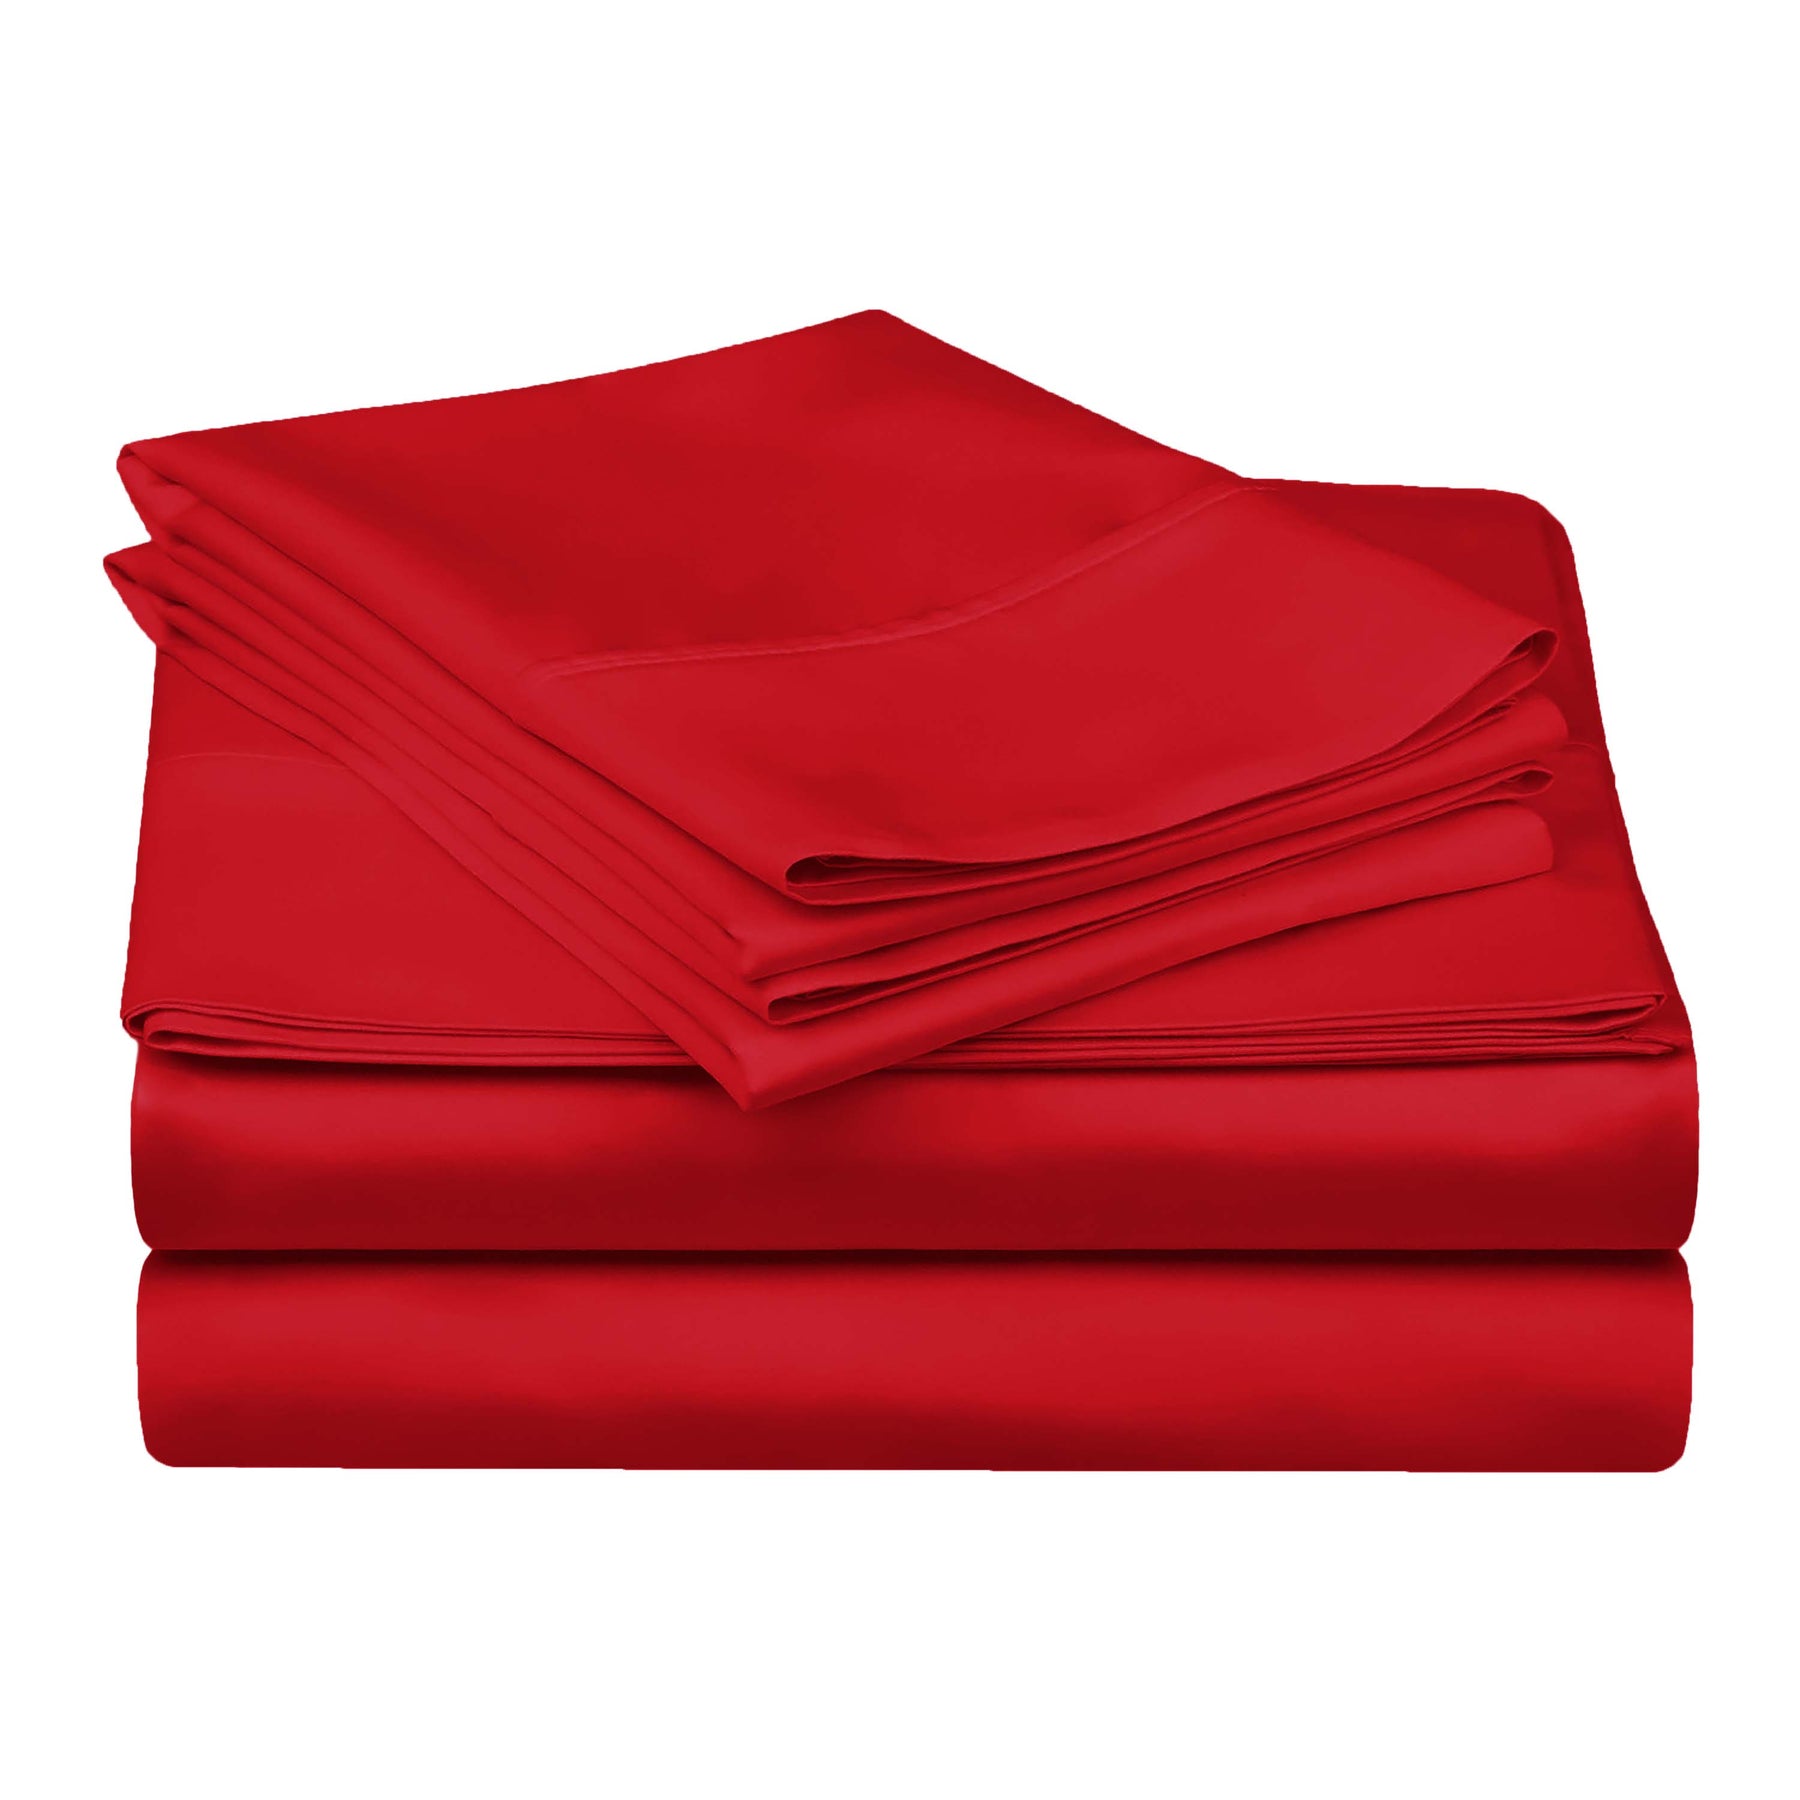 300 Thread Count Egyptian Cotton Solid Deep Pocket Sheet Set - Red